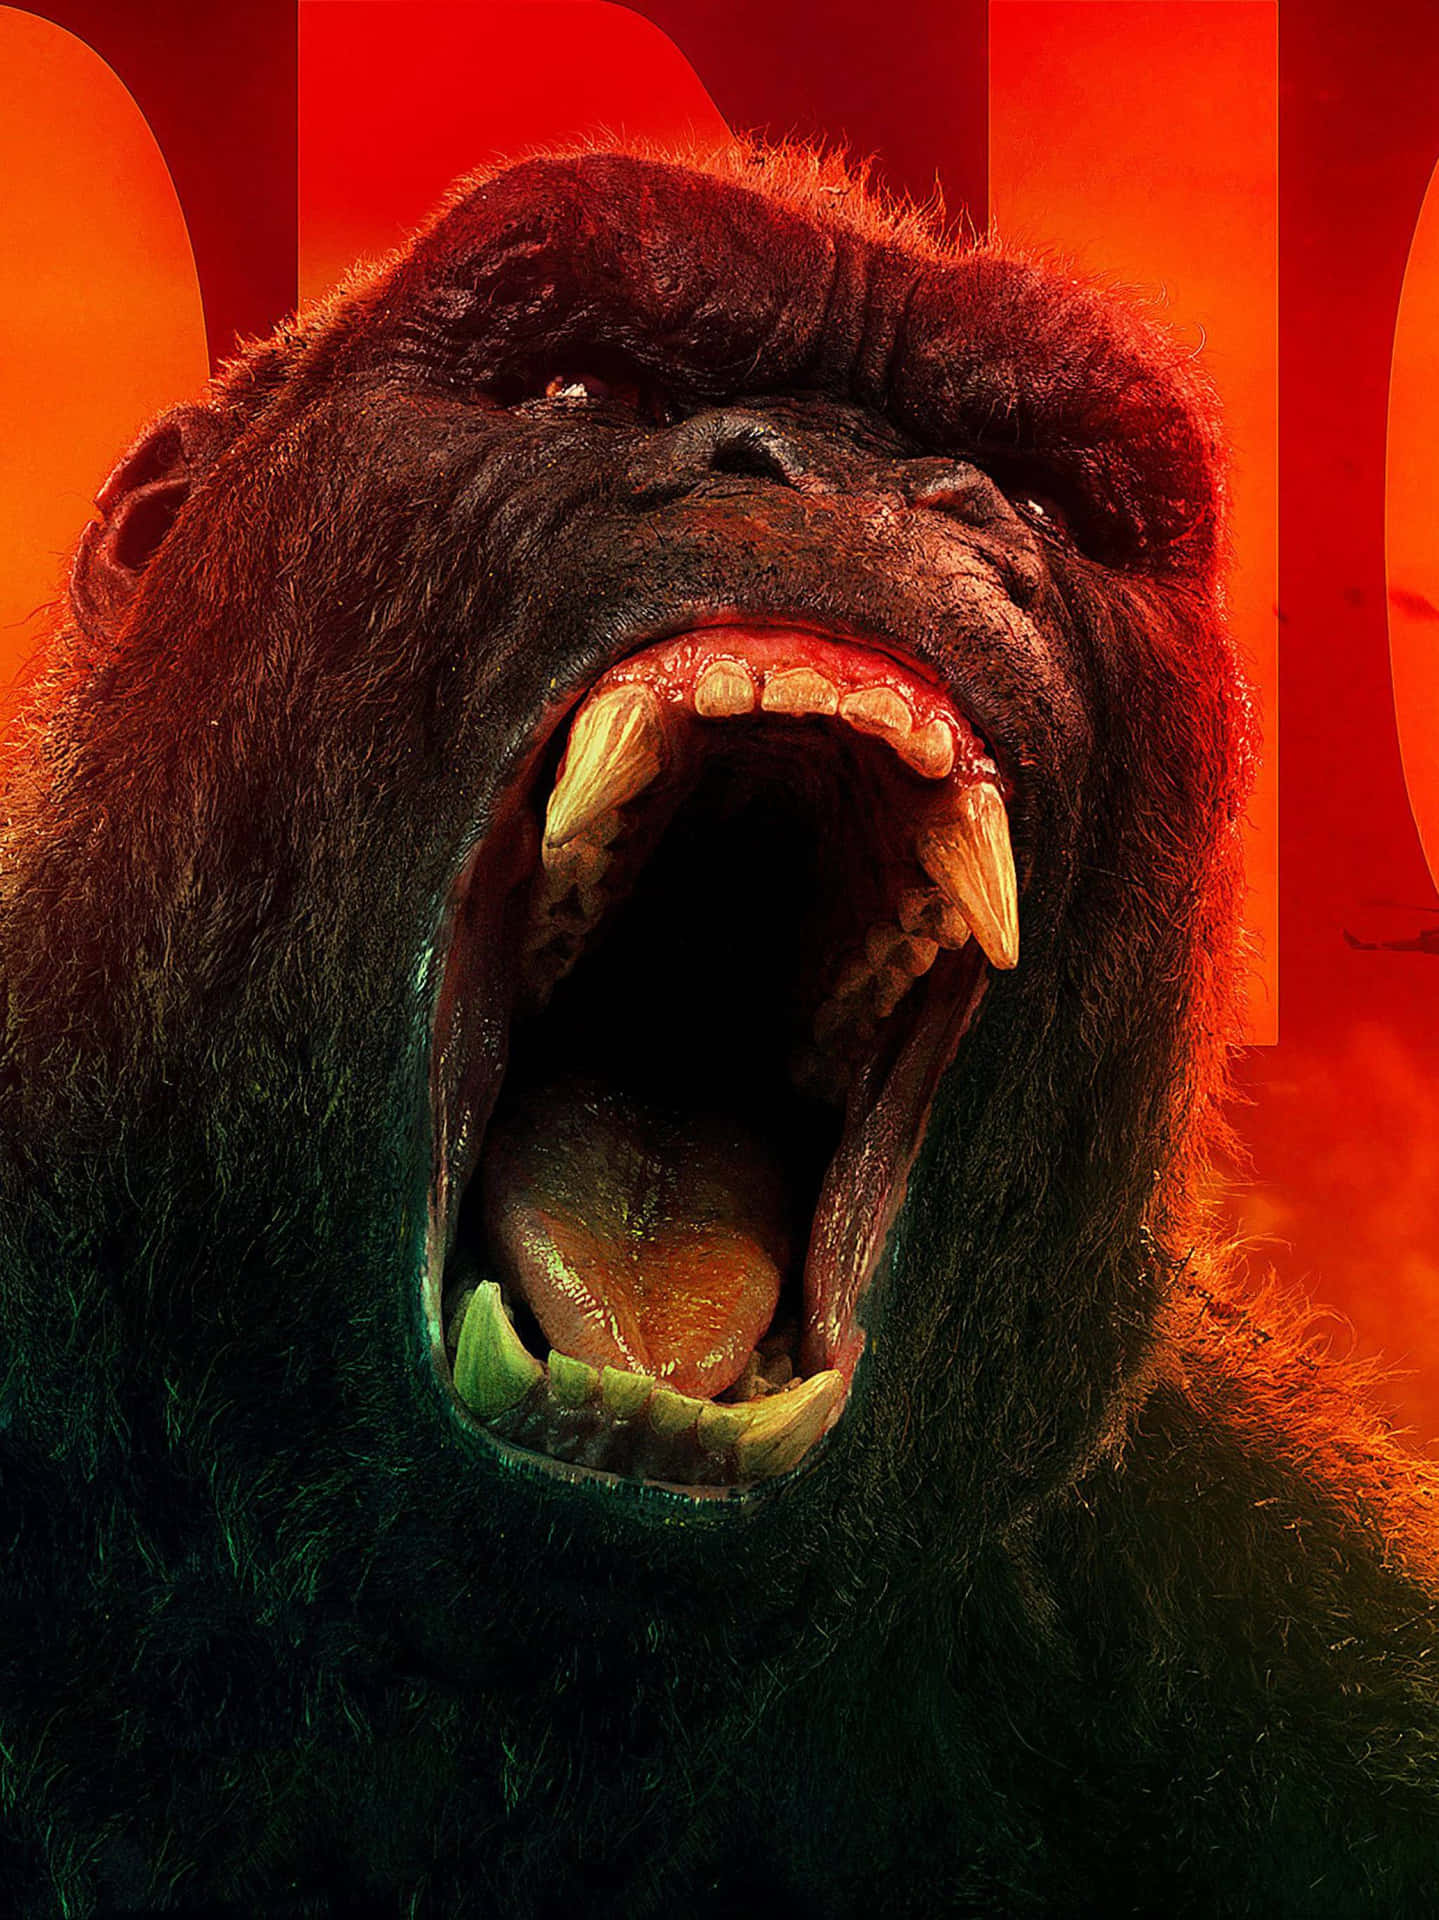 "King Kong Is Here To Conquer" Wallpaper